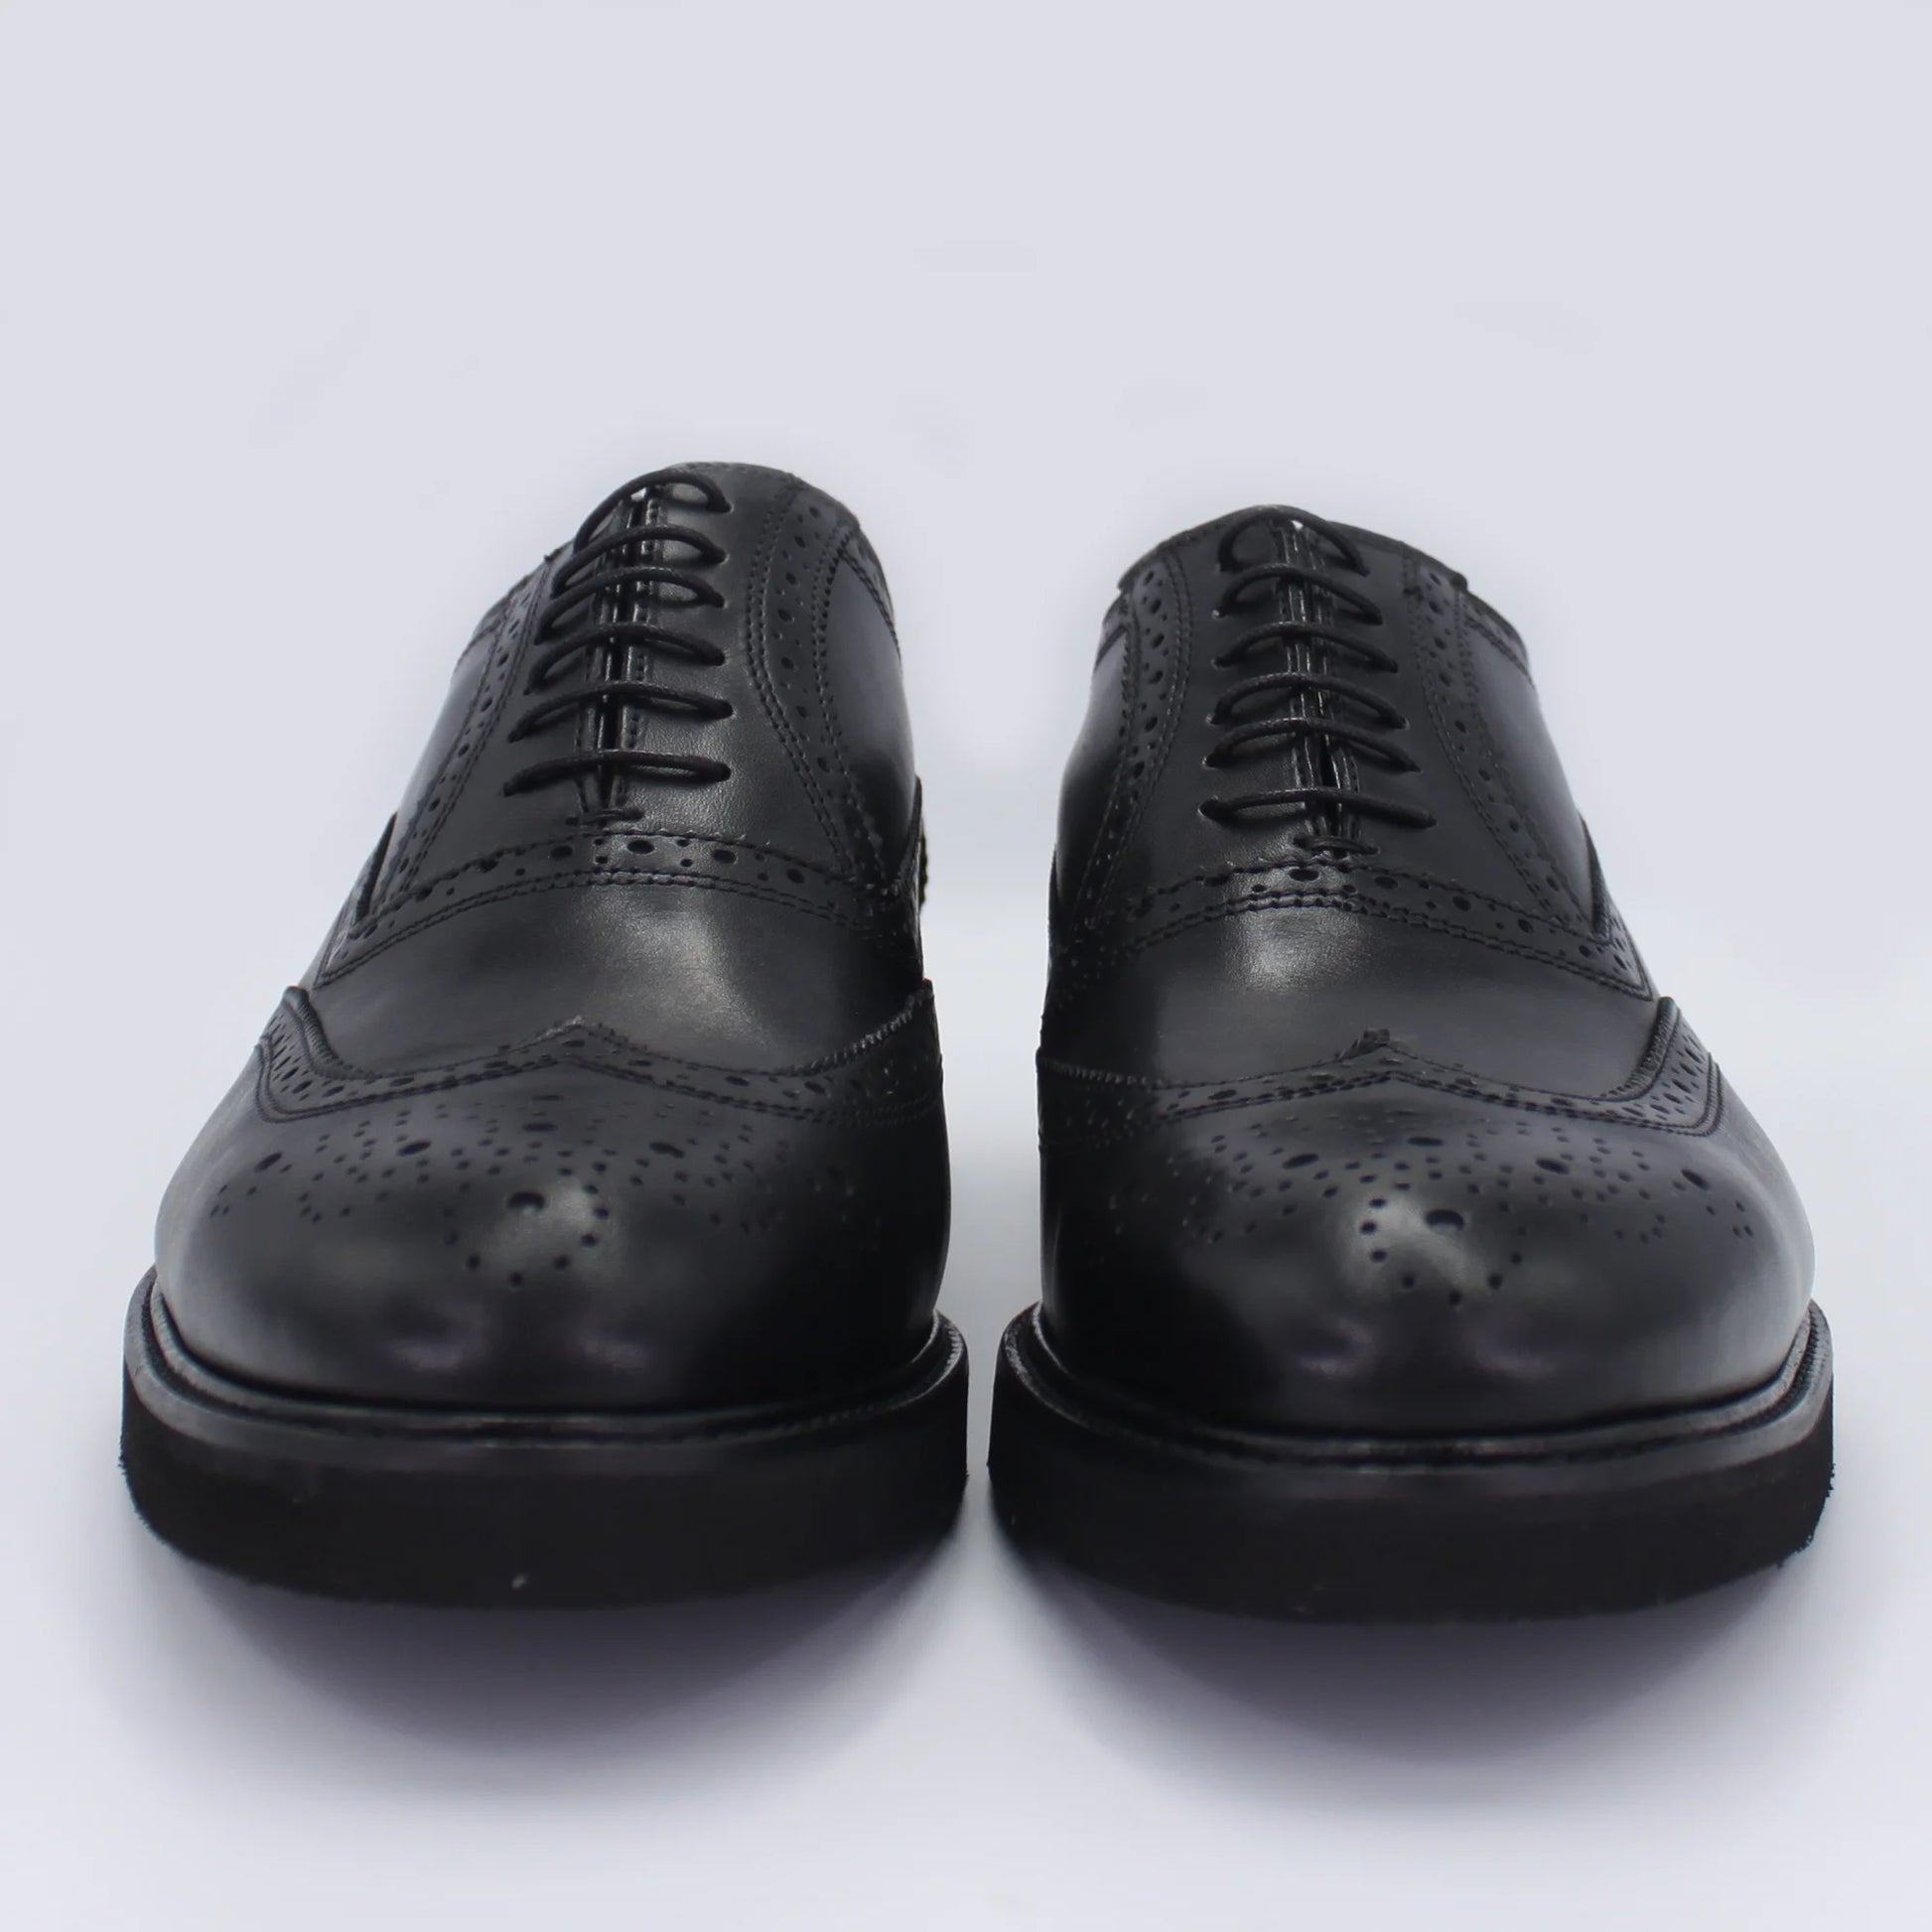 Shop Handmade Italian Leather Oxford Brogue in Black (MF6650) or browse our range of hand-made Italian oxfords & brogues for men in leather or suede in-store at Aliverti Durban or Cape Town, or shop online. We deliver in South Africa & offer multiple payment plans as well as accept multiple safe & secure payment methods.